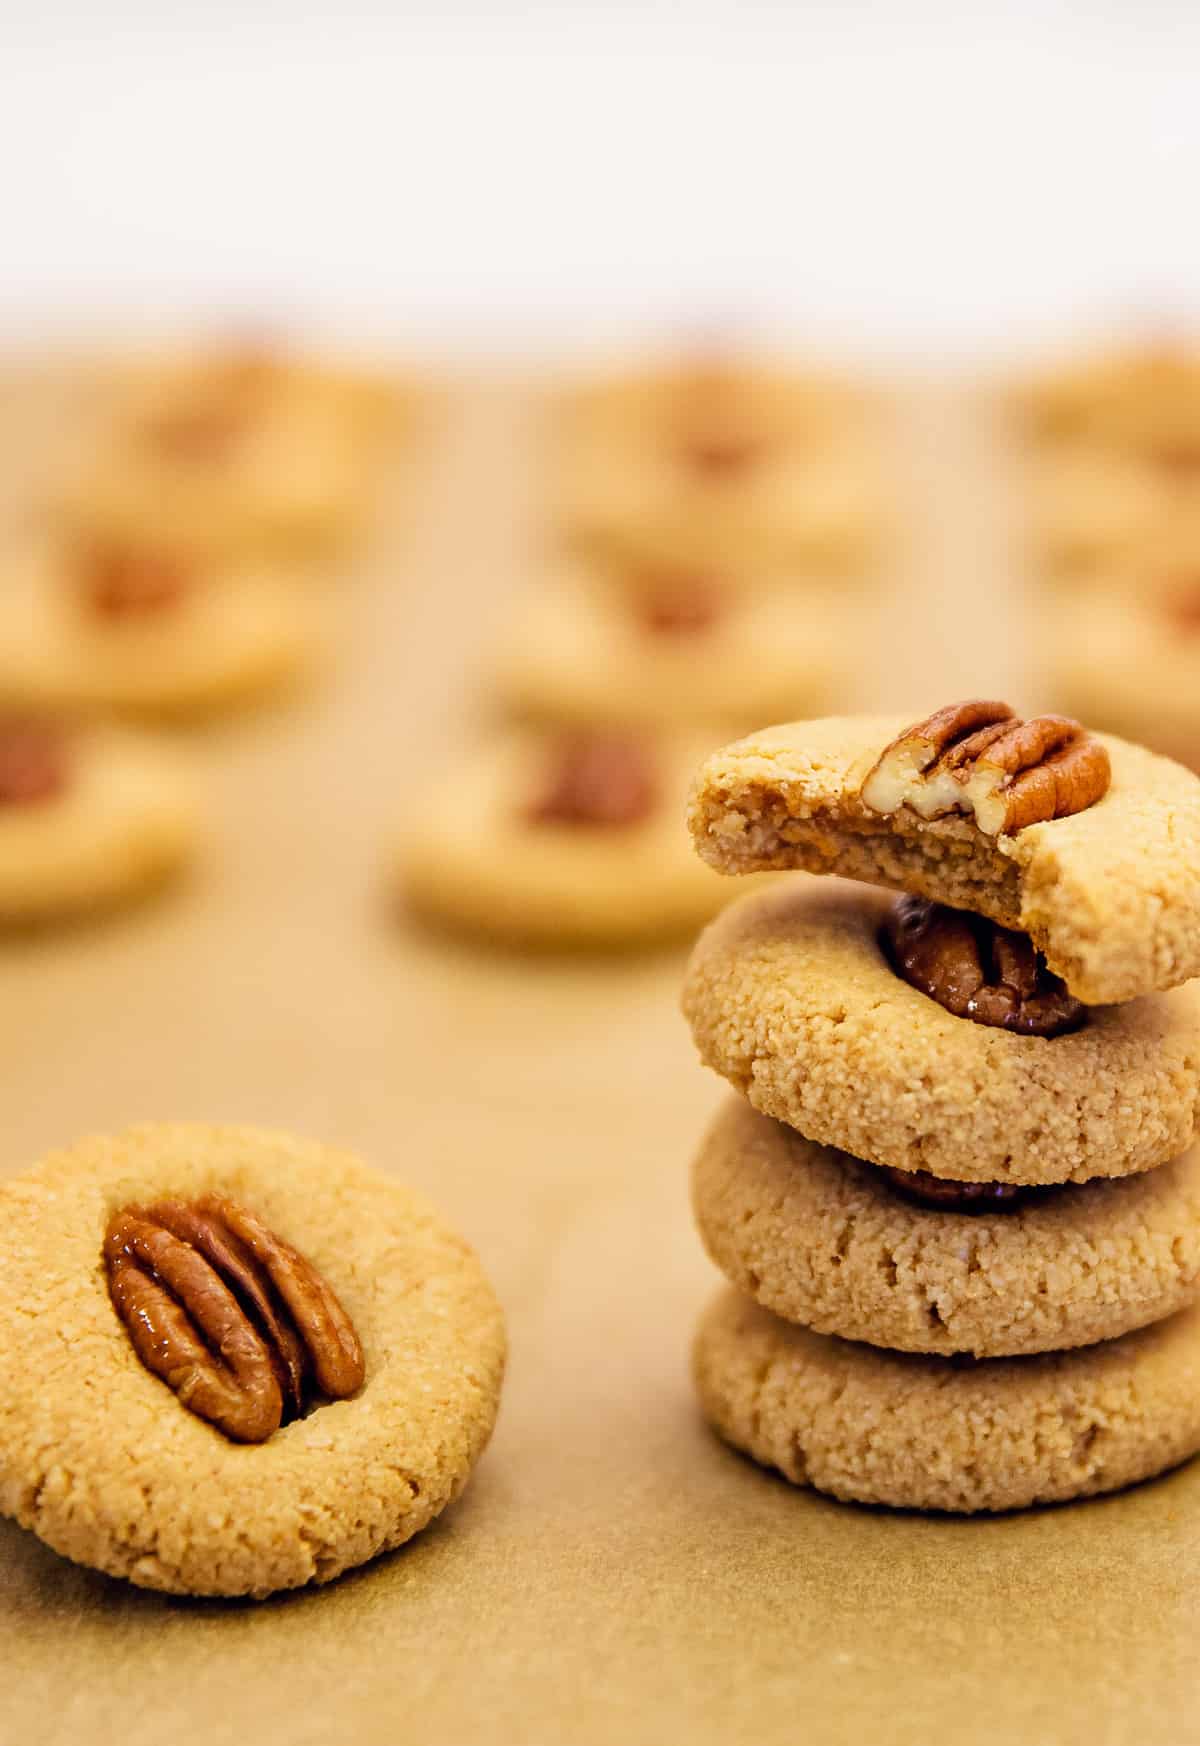 Old Fashioned Maple Pecan Cookies, Maple Pecan Cookie, Maple Cookies, Pecan Cookies, Cookies, whole food plant based, whole food, refined sugar free, maple, maple syrup, syrup, almond flour, almond, vegetarian, vegan, vegetarian cookies, vegan cookies, simple, easy, fast, 30 minutes, healthy, delicious, healthy cookies, oil free, gluten free, cookies, gluten free cookies, whole food plant based cookies, plant based cookies, cinnamon